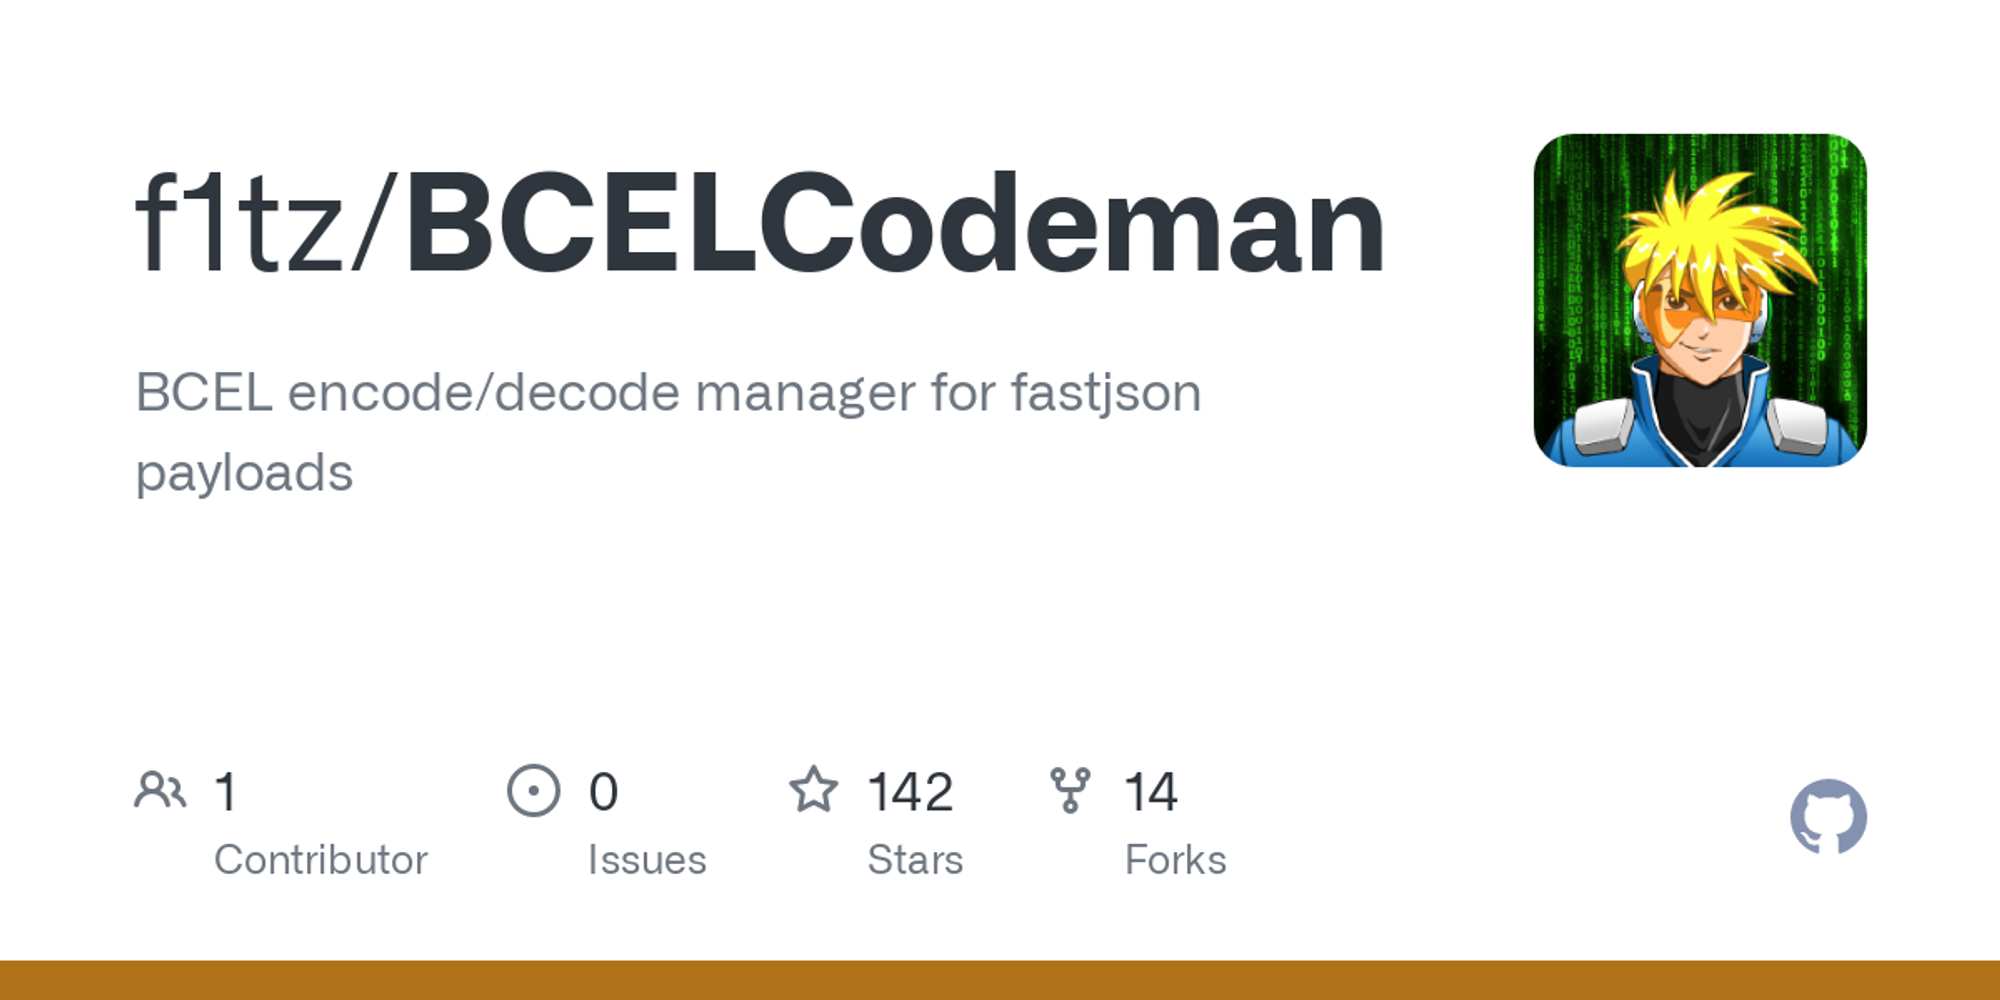 GitHub - f1tz/BCELCodeman: BCEL encode/decode manager for fastjson payloads